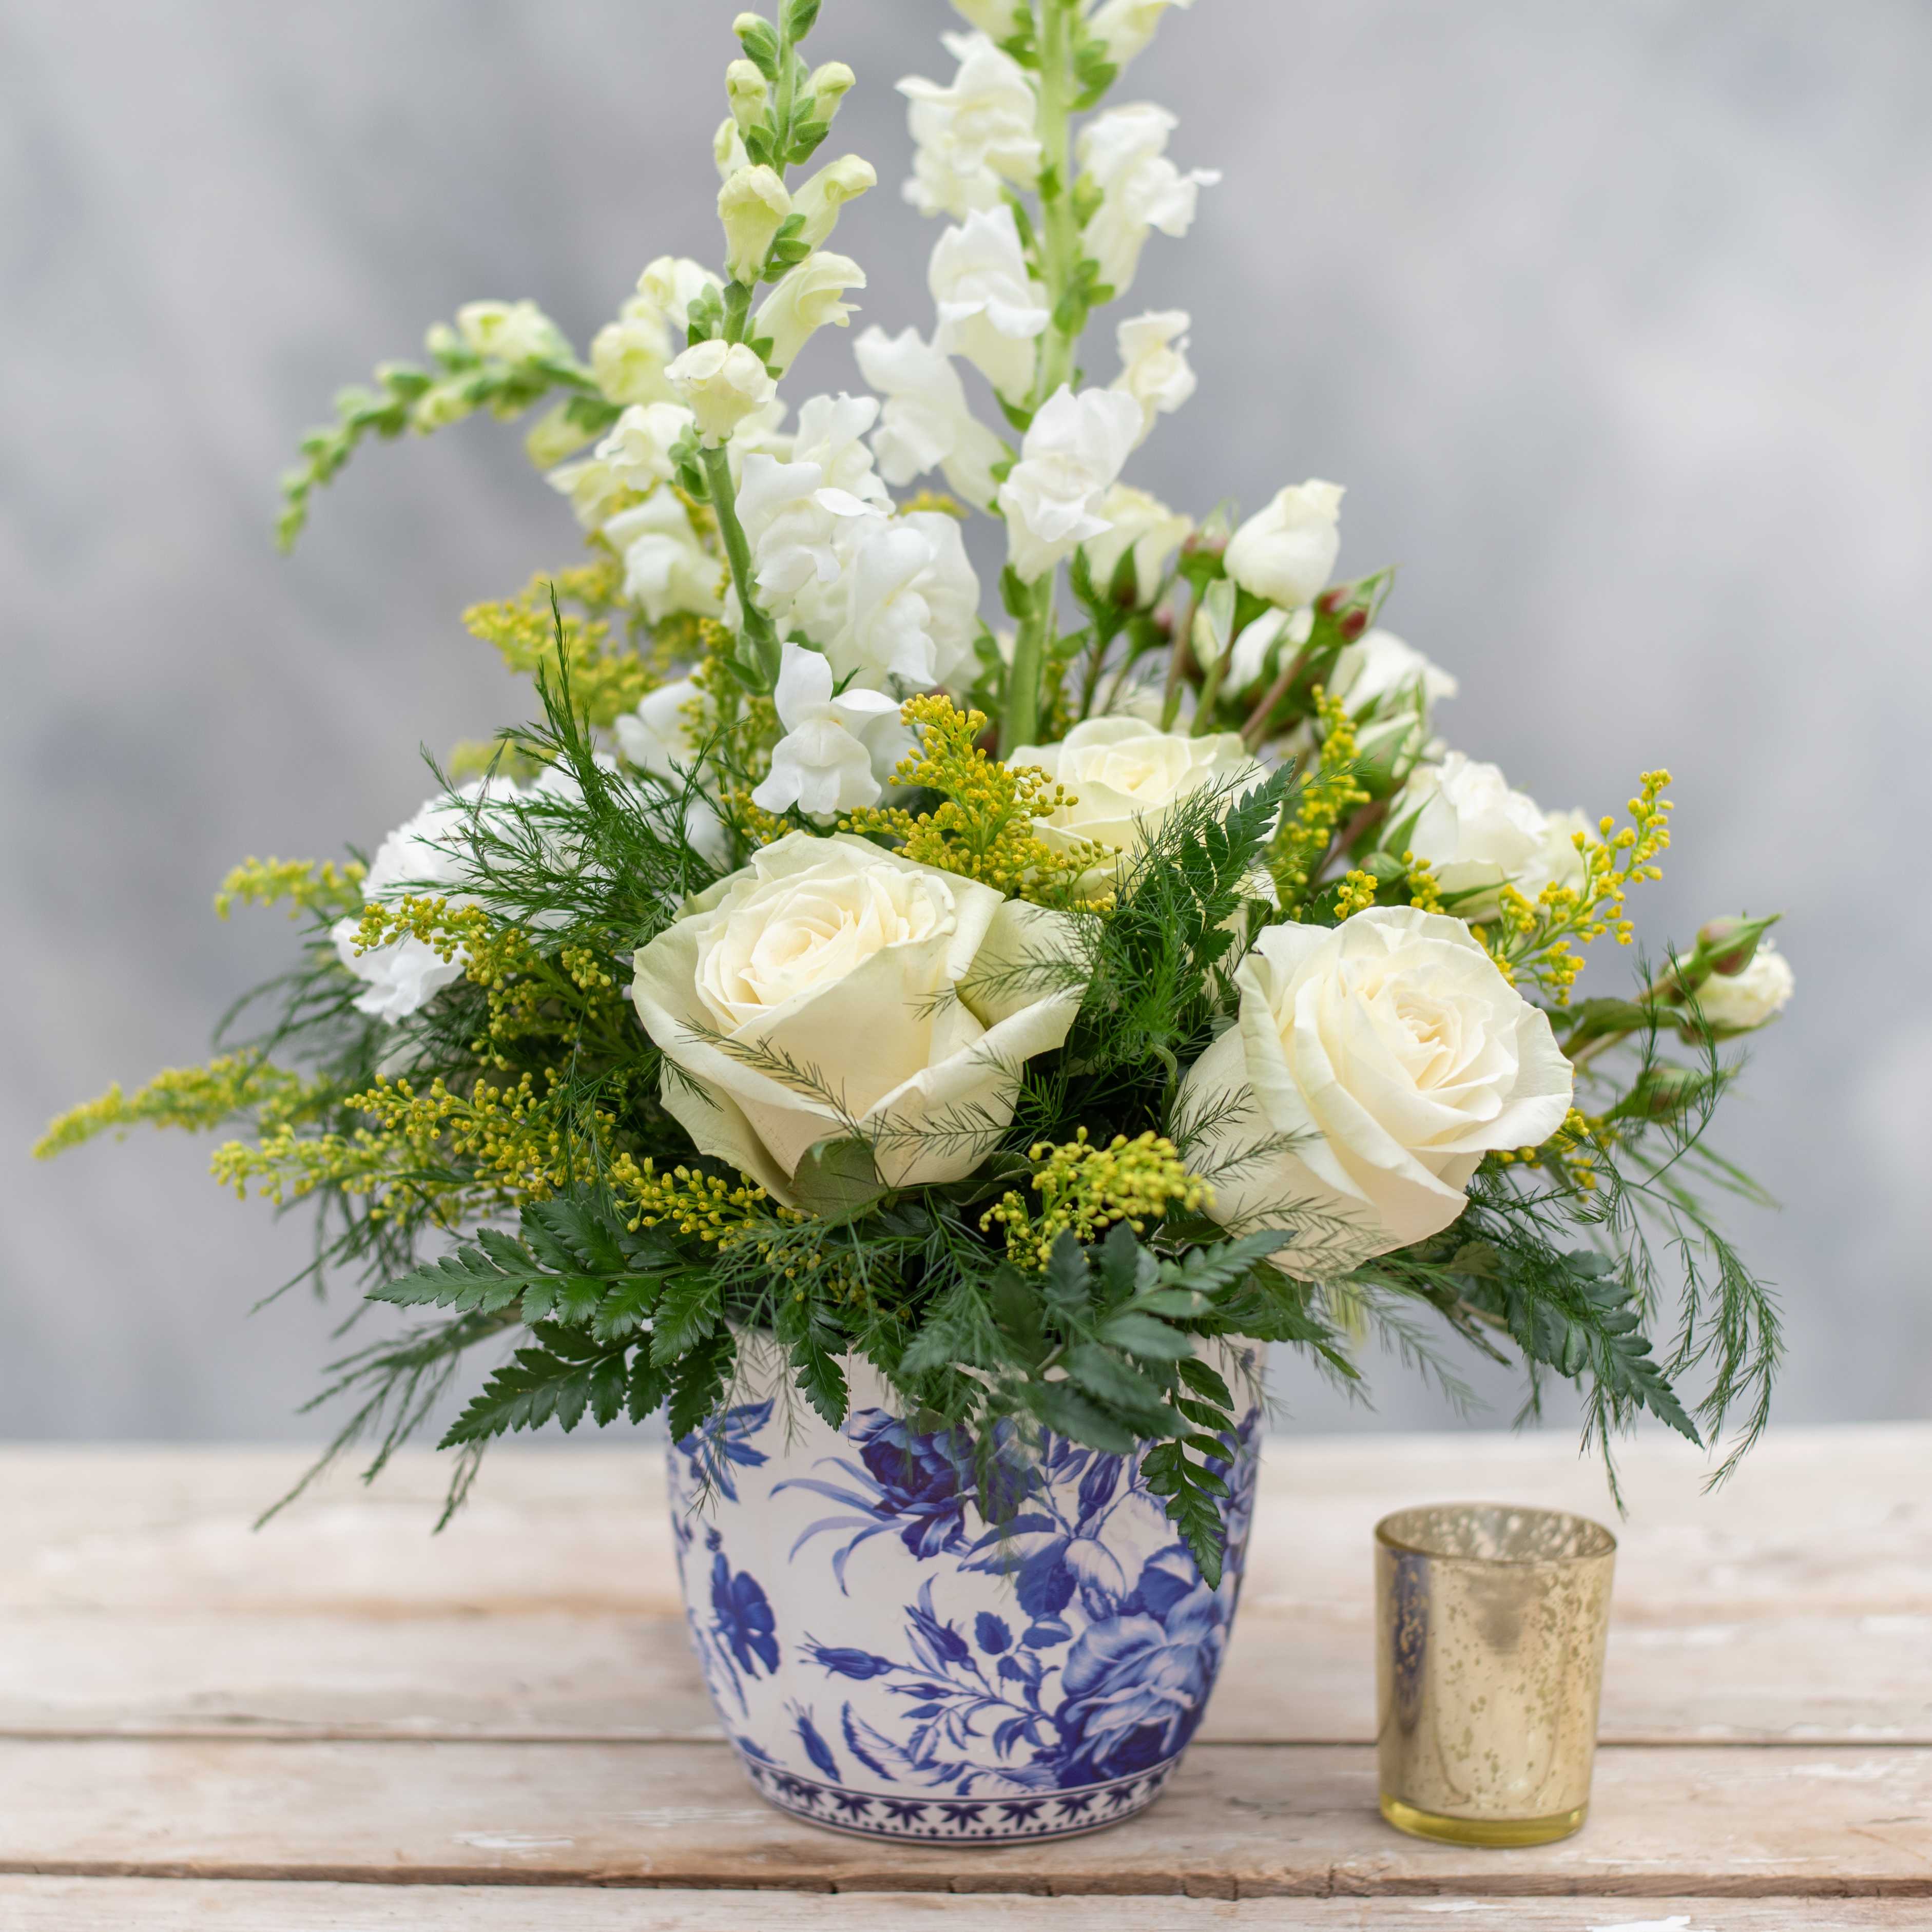 Chinoiserie - A timeless and elegant arrangement in a chinoiserie style ceramic vase.  Chinoiserie is a blend of European design with Asian influences.  We have chosen to fill this whimsical design vase with white roses and snapdragons a touch of yellow with solidago and just enough greens so as not to detract from the container.